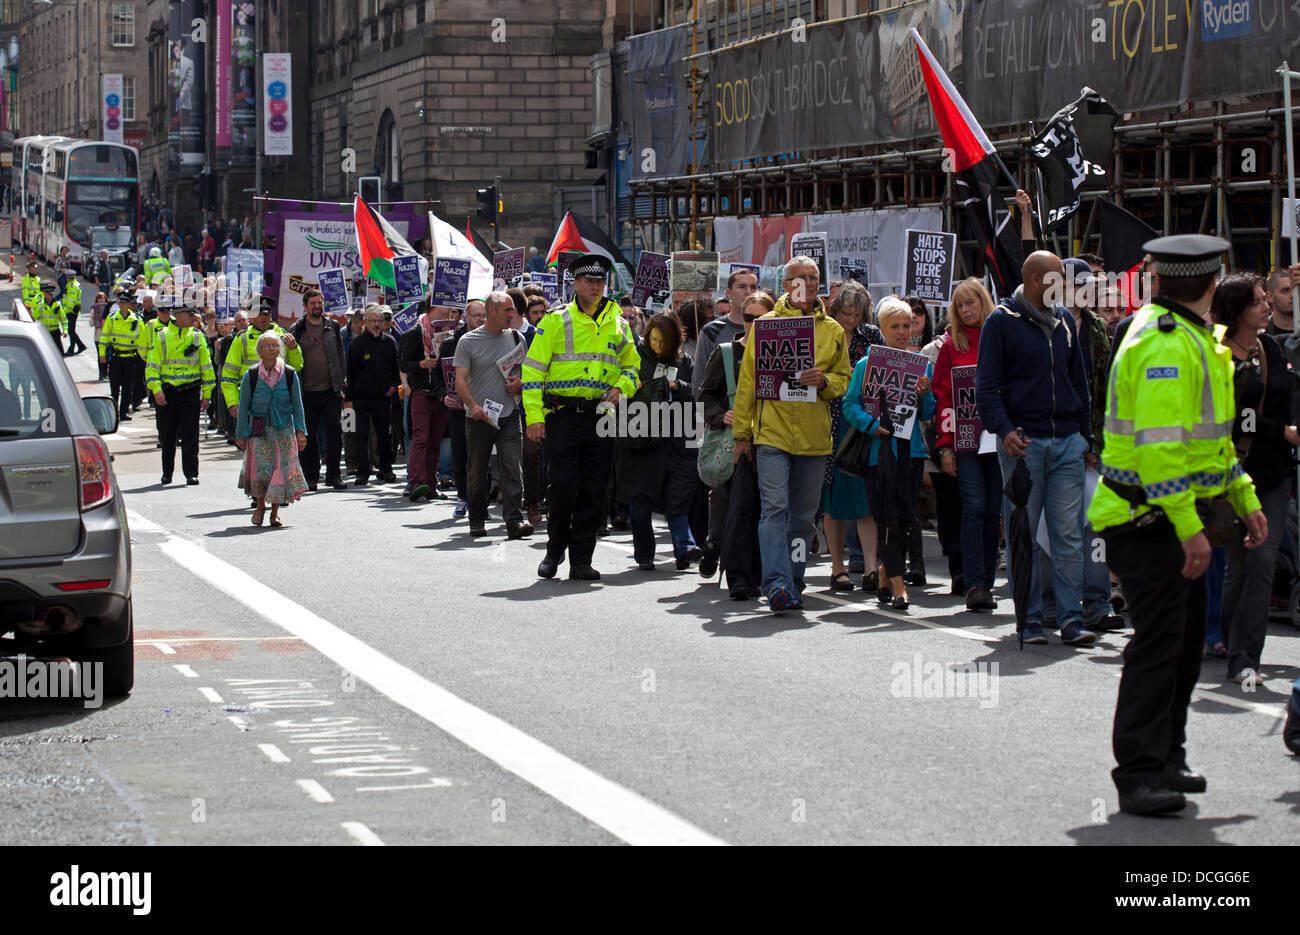 Edinburgh, Scotland 17th August 2013, March against racist and fascist groups brings  traffic to a standstill in city centre. A few streets away the Scottish Defence League (SDL) march to  Parliament. Stock Photo